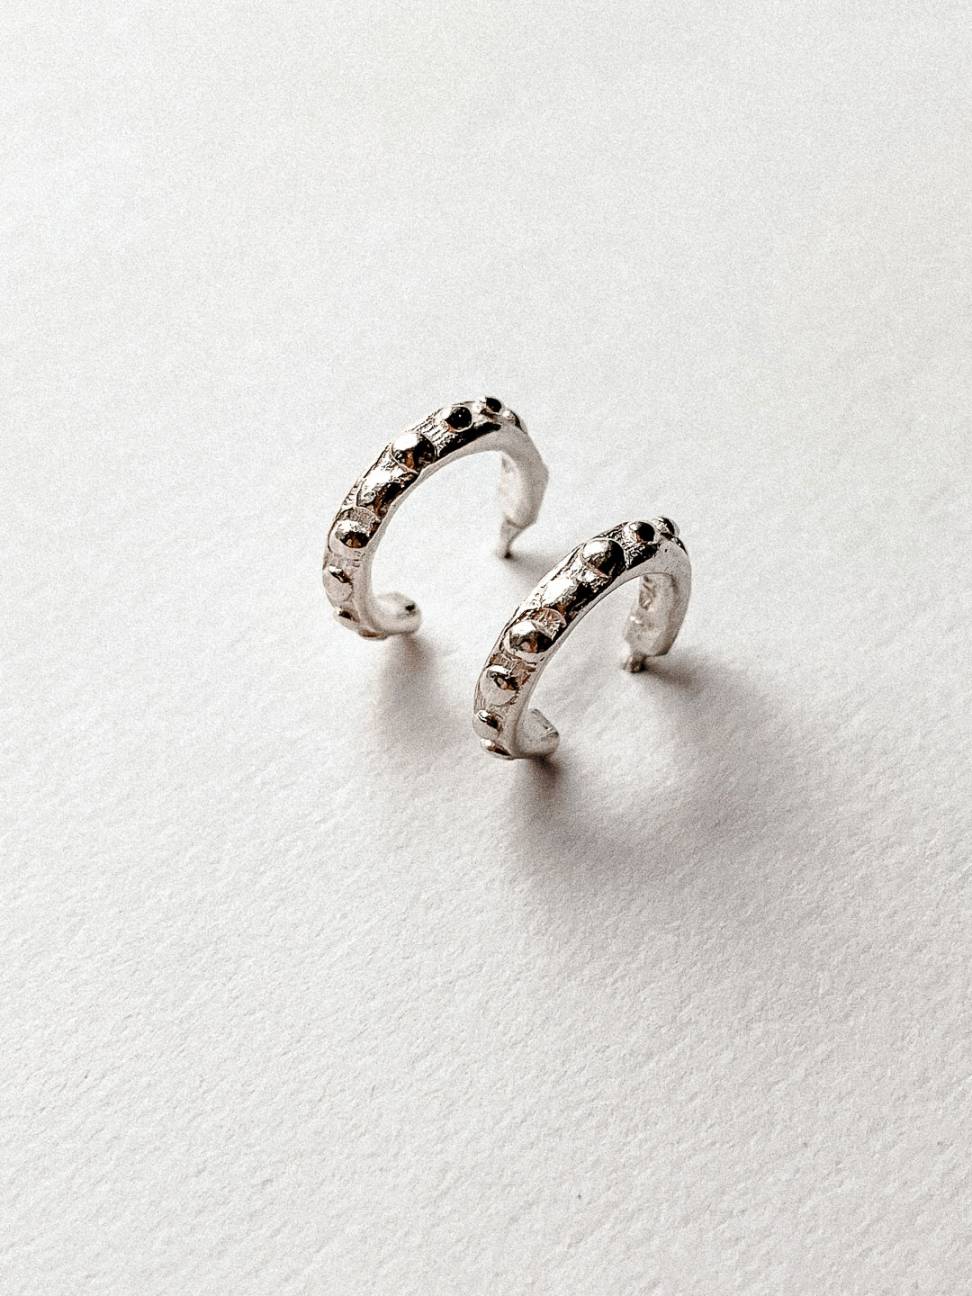 A pair of Hoop Earrings showing the texture using a side profile in Sterling Silver